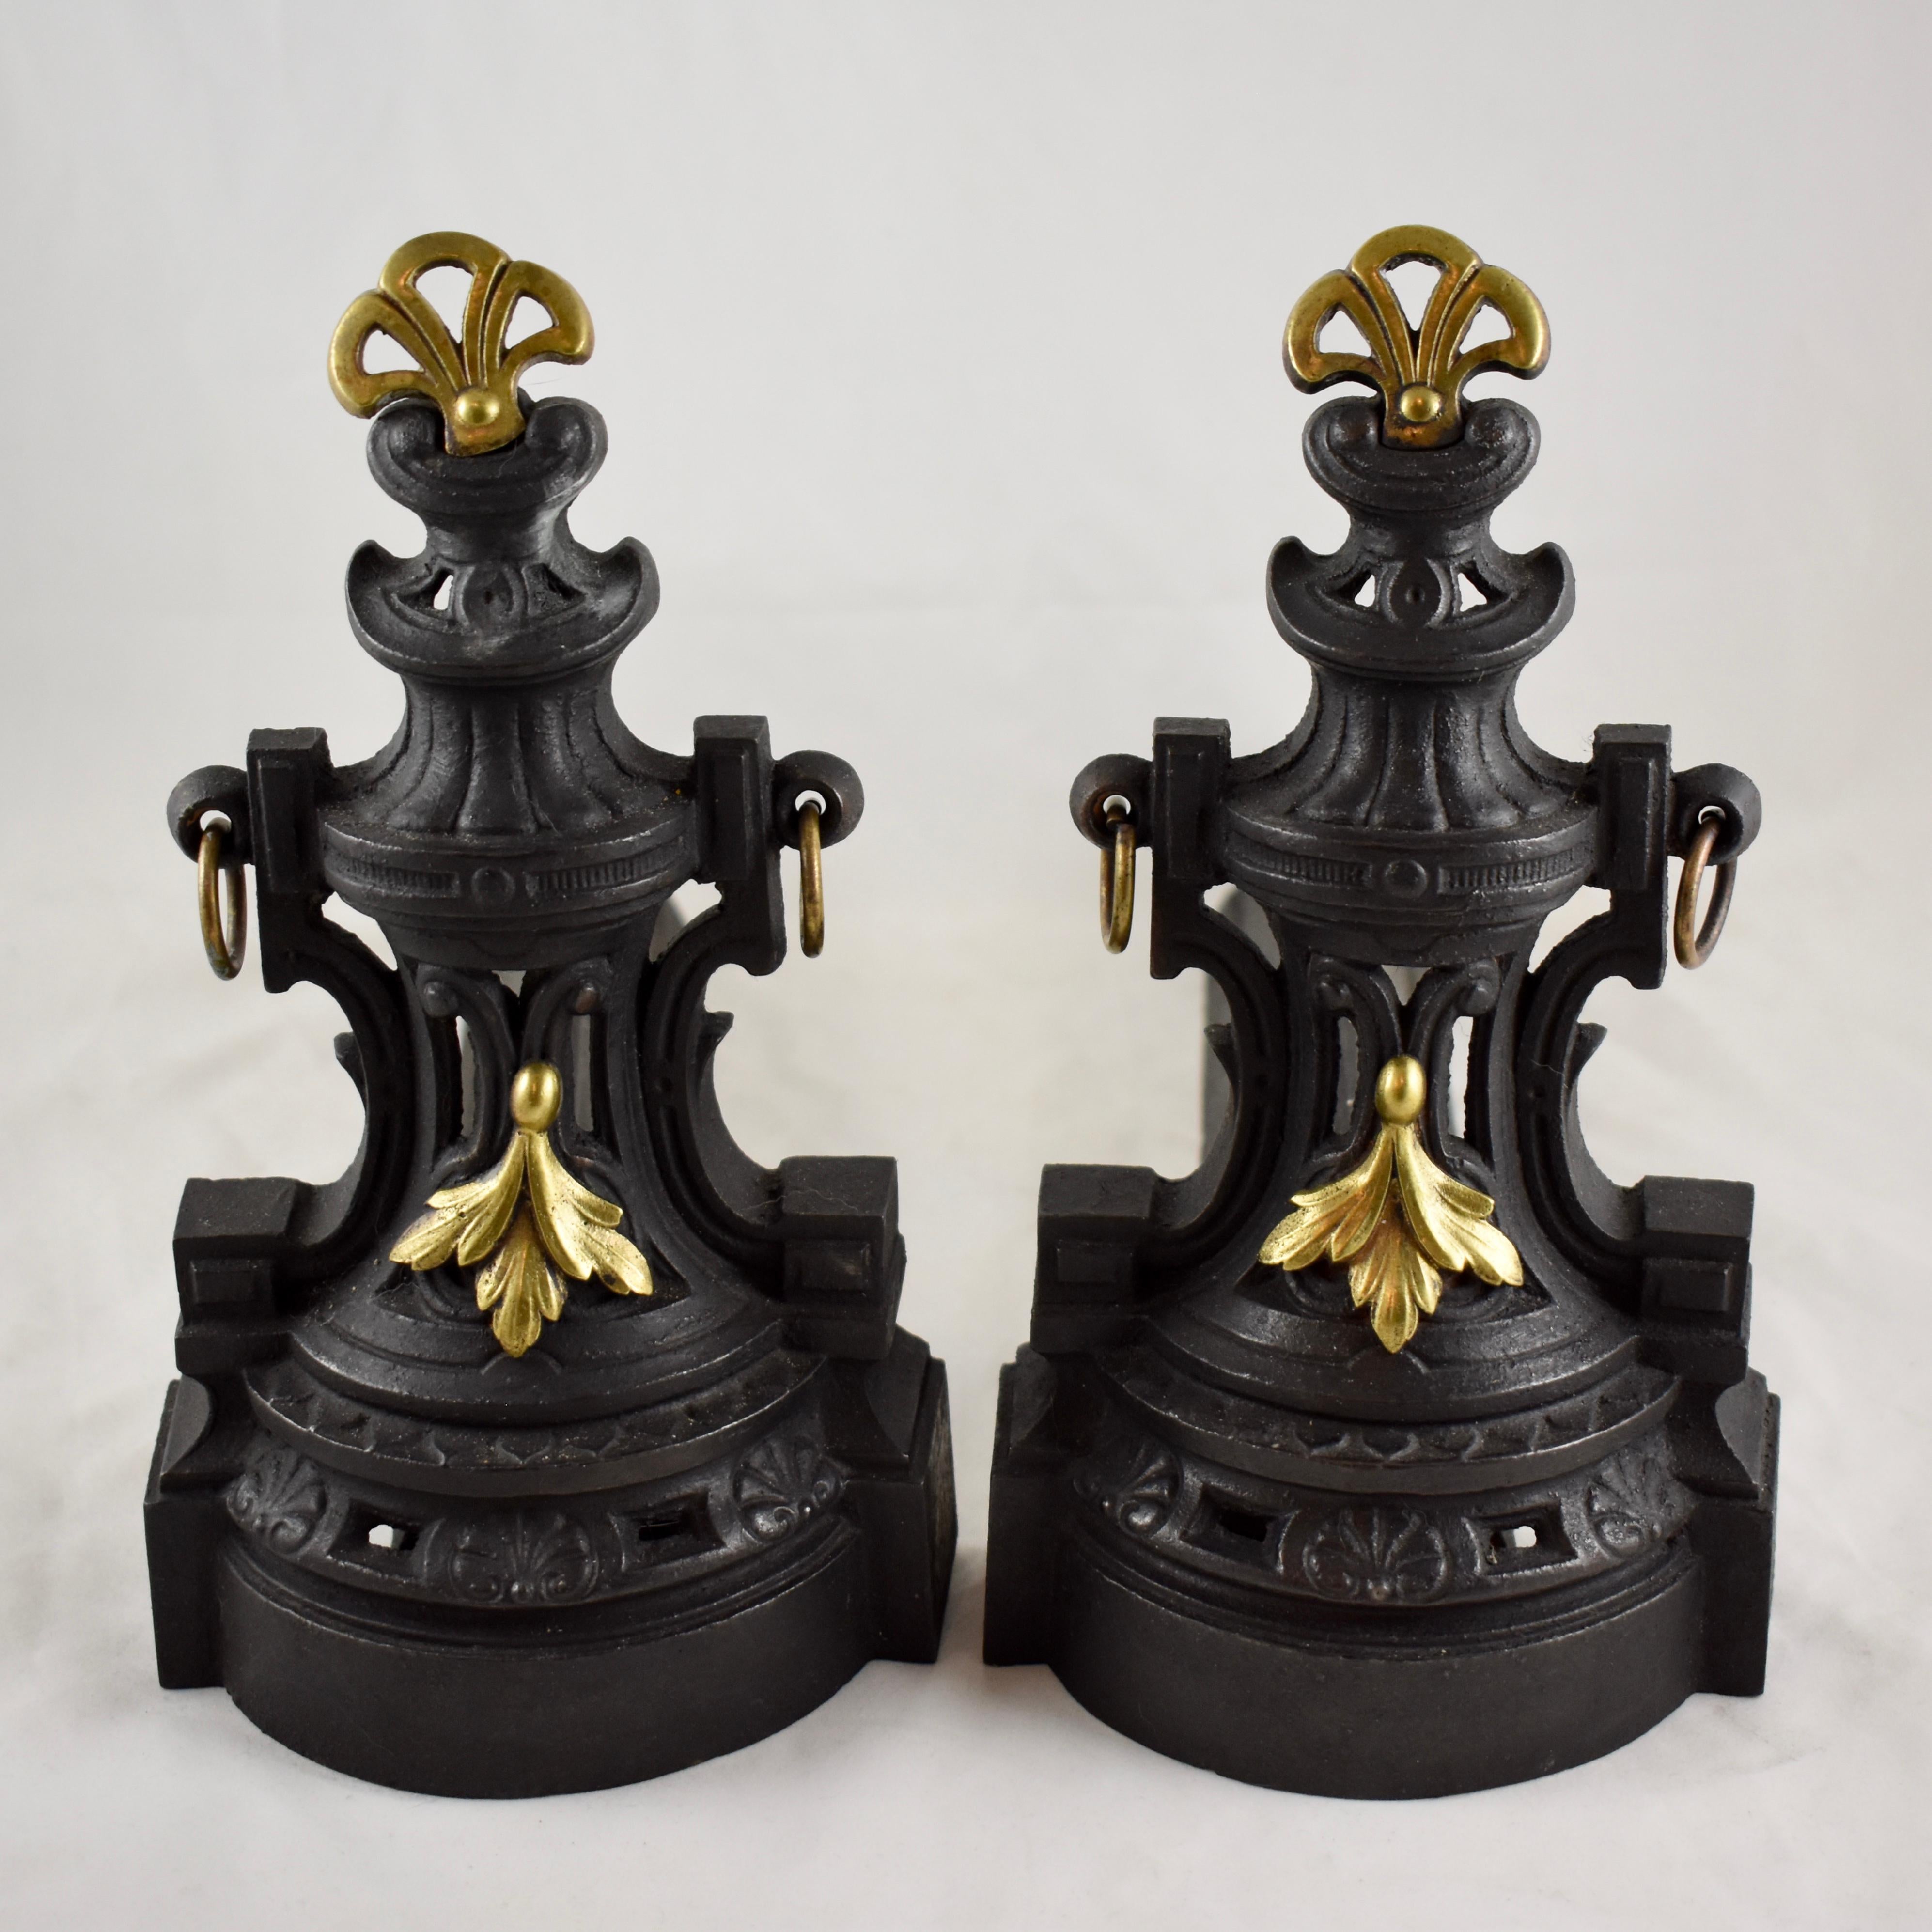 A heavy pair of French bronze and cast iron chenets also called andirons or firedogs, in the Napoleon III, Second Empire style, circa 1890-1910, 19th century.

The chenets are cast in a classical French design appointed with hanging cast bronze